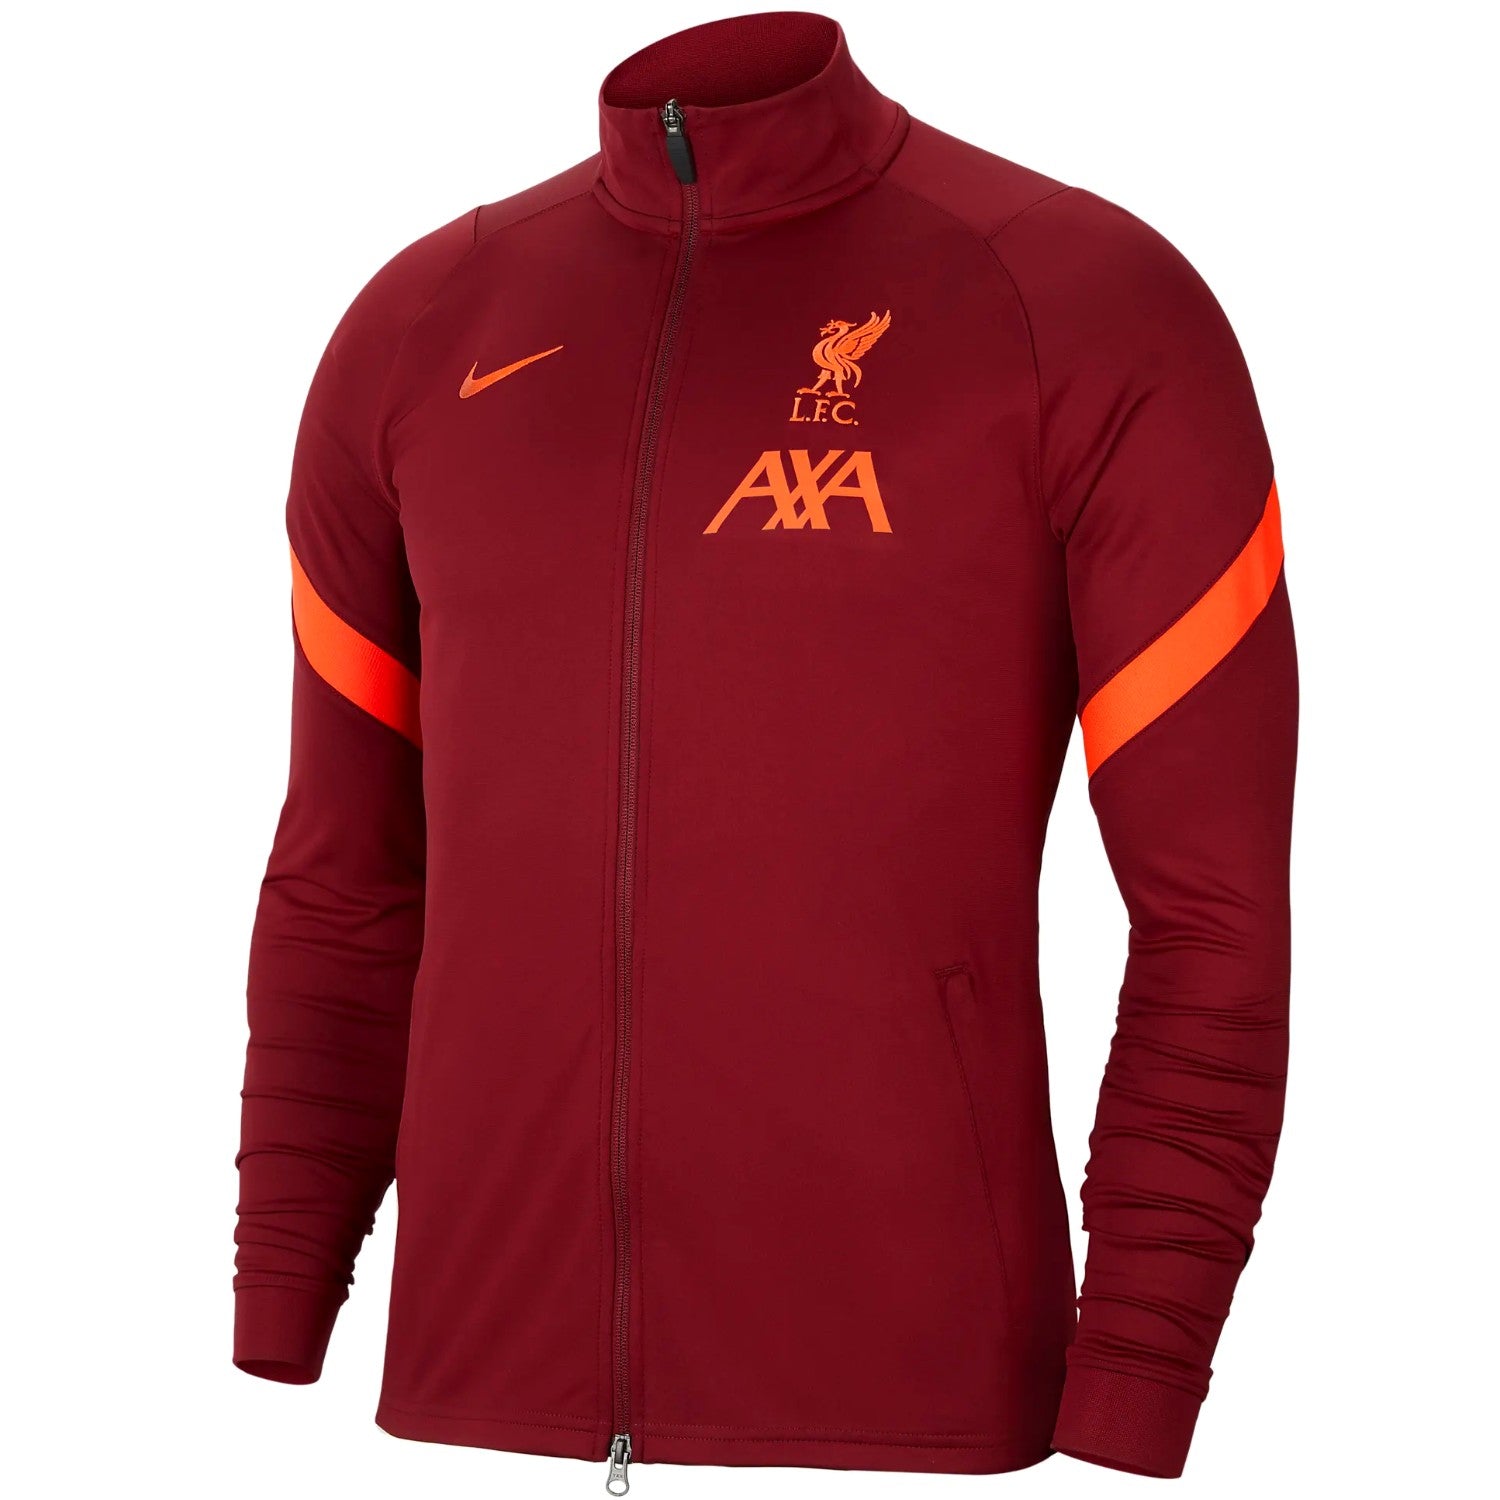 LFC Official training clothing, tracksuits, training tops